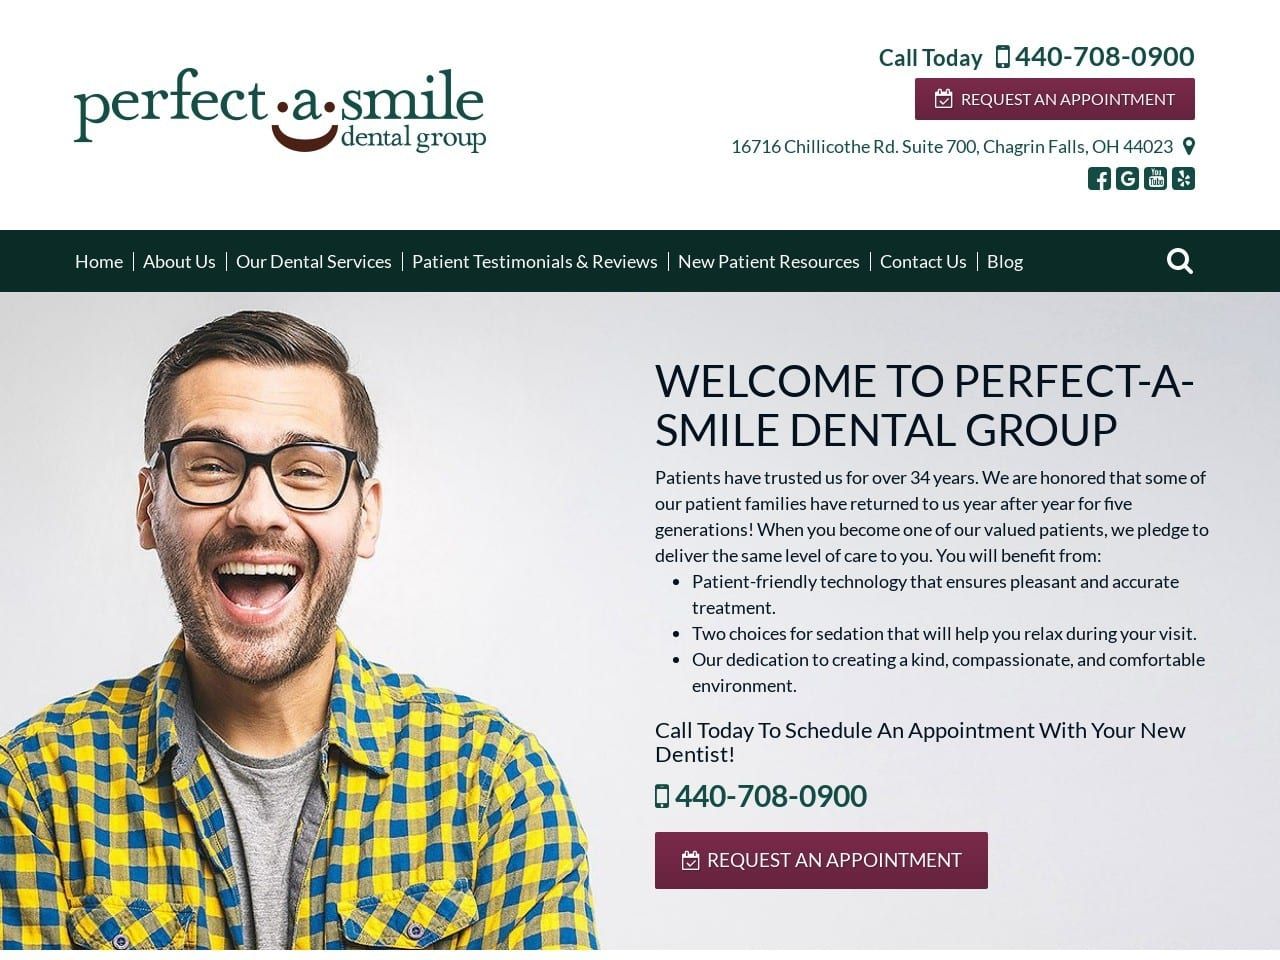 Perfect A Smile Dental Group Website Screenshot from perfectasmile.com